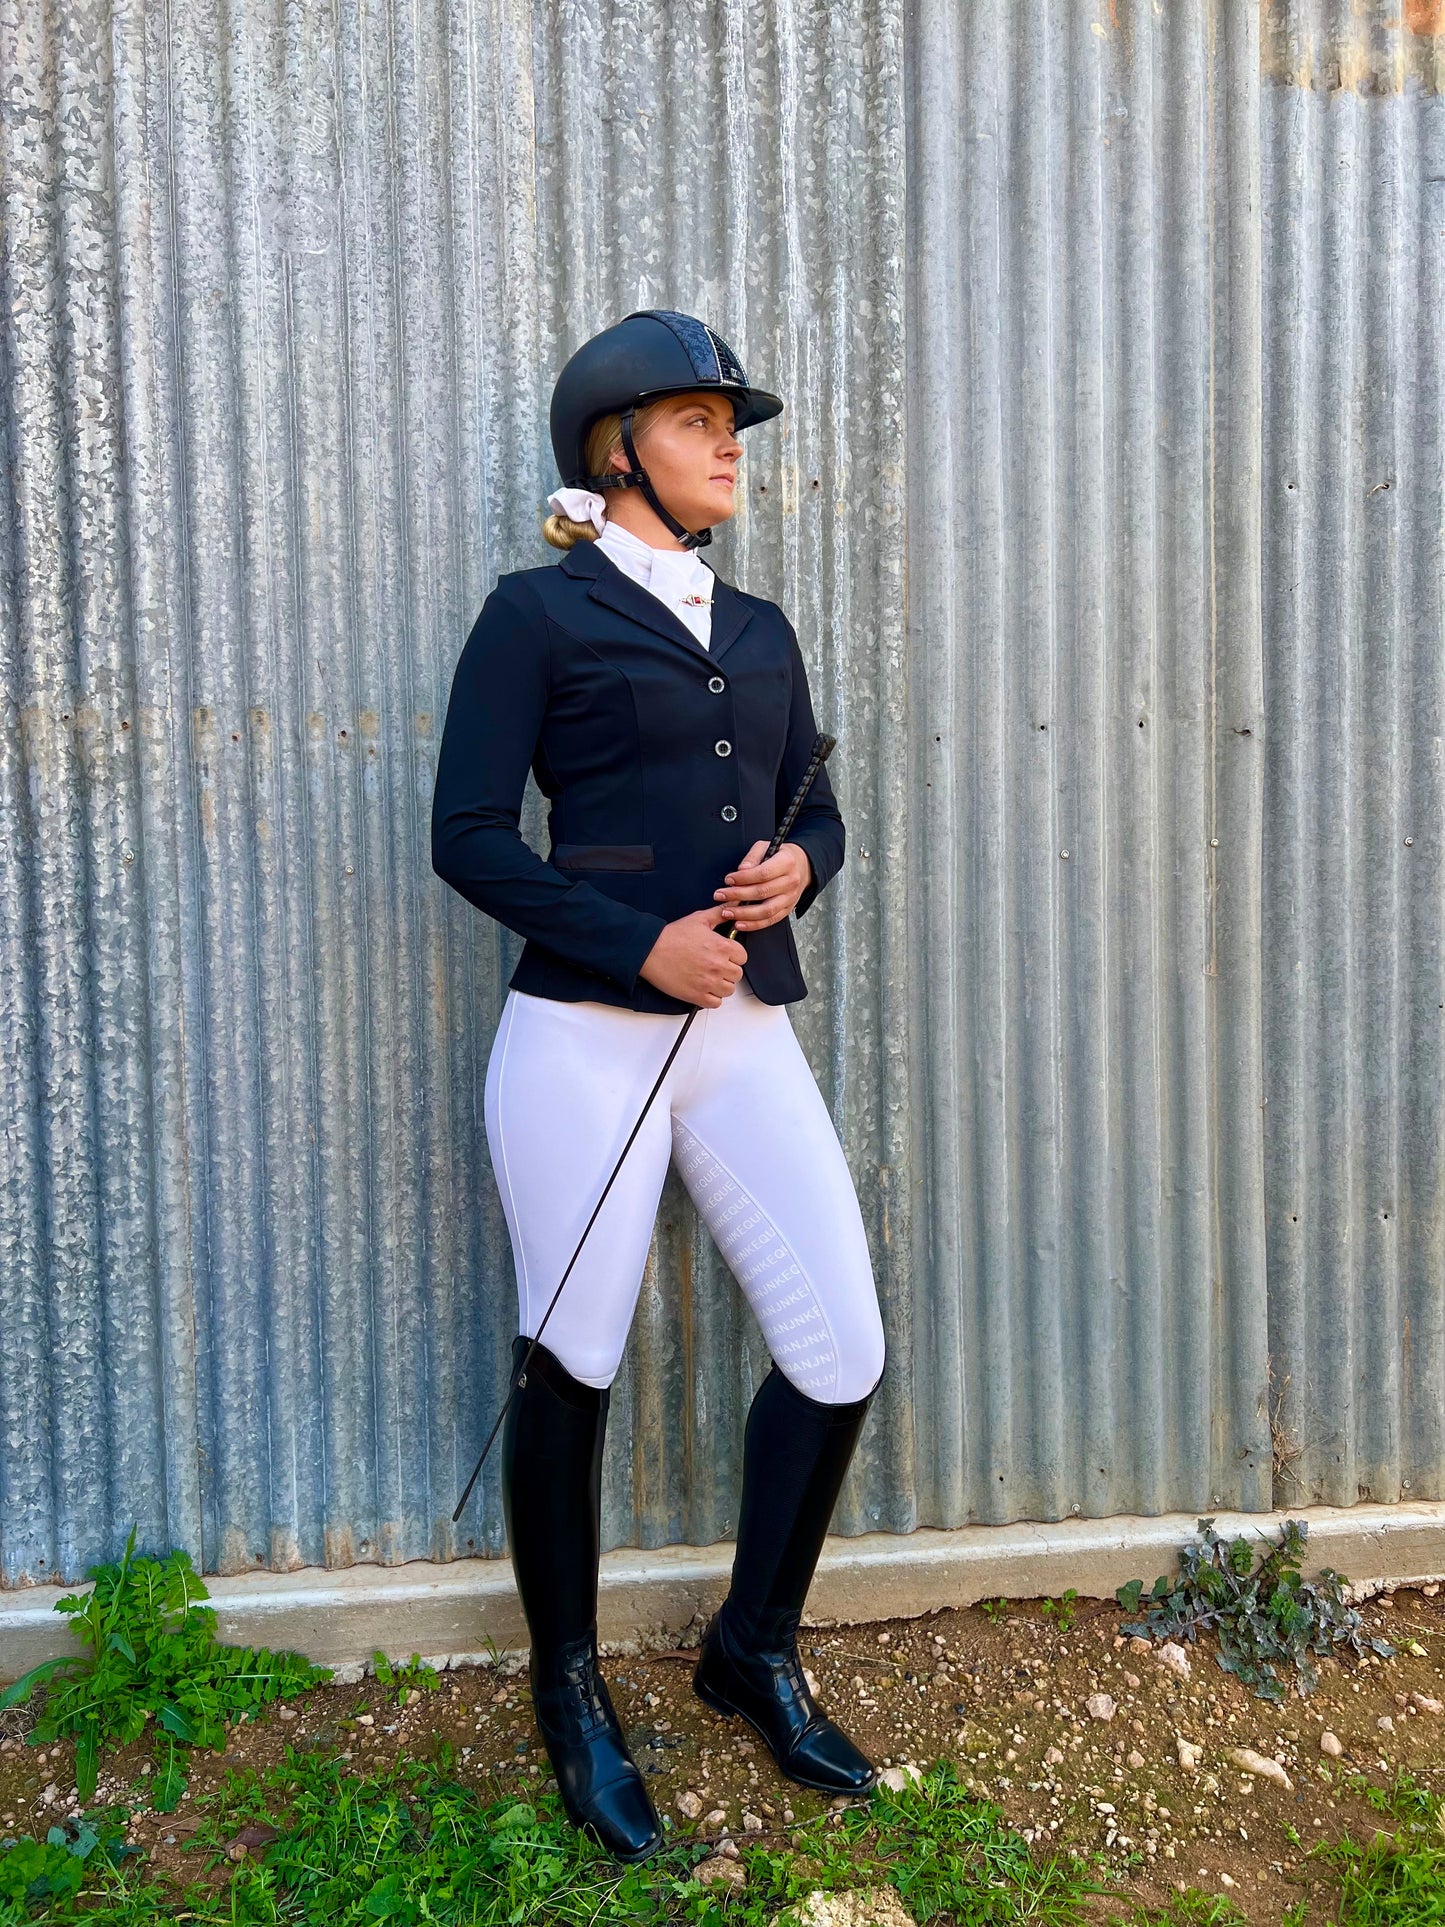 Woman in helmet and horse riding tights stands by corrugated wall.